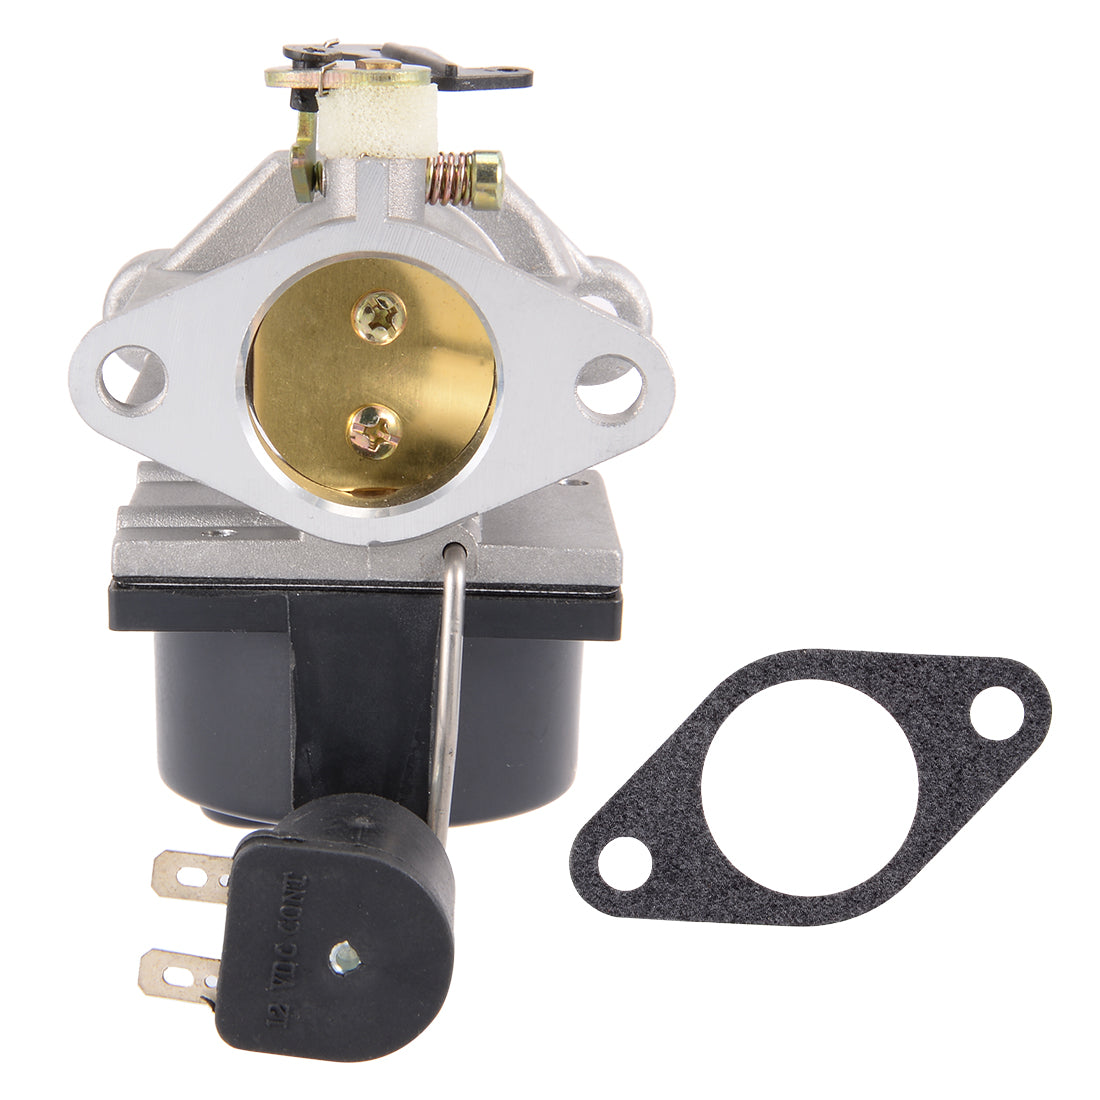 uxcell Uxcell 640330 Carburetor Carb for Tecumseh 640330A 640072A 640159 640034A OHV160 OHV165 OHV170 OHV175 OHV180 with Gasket